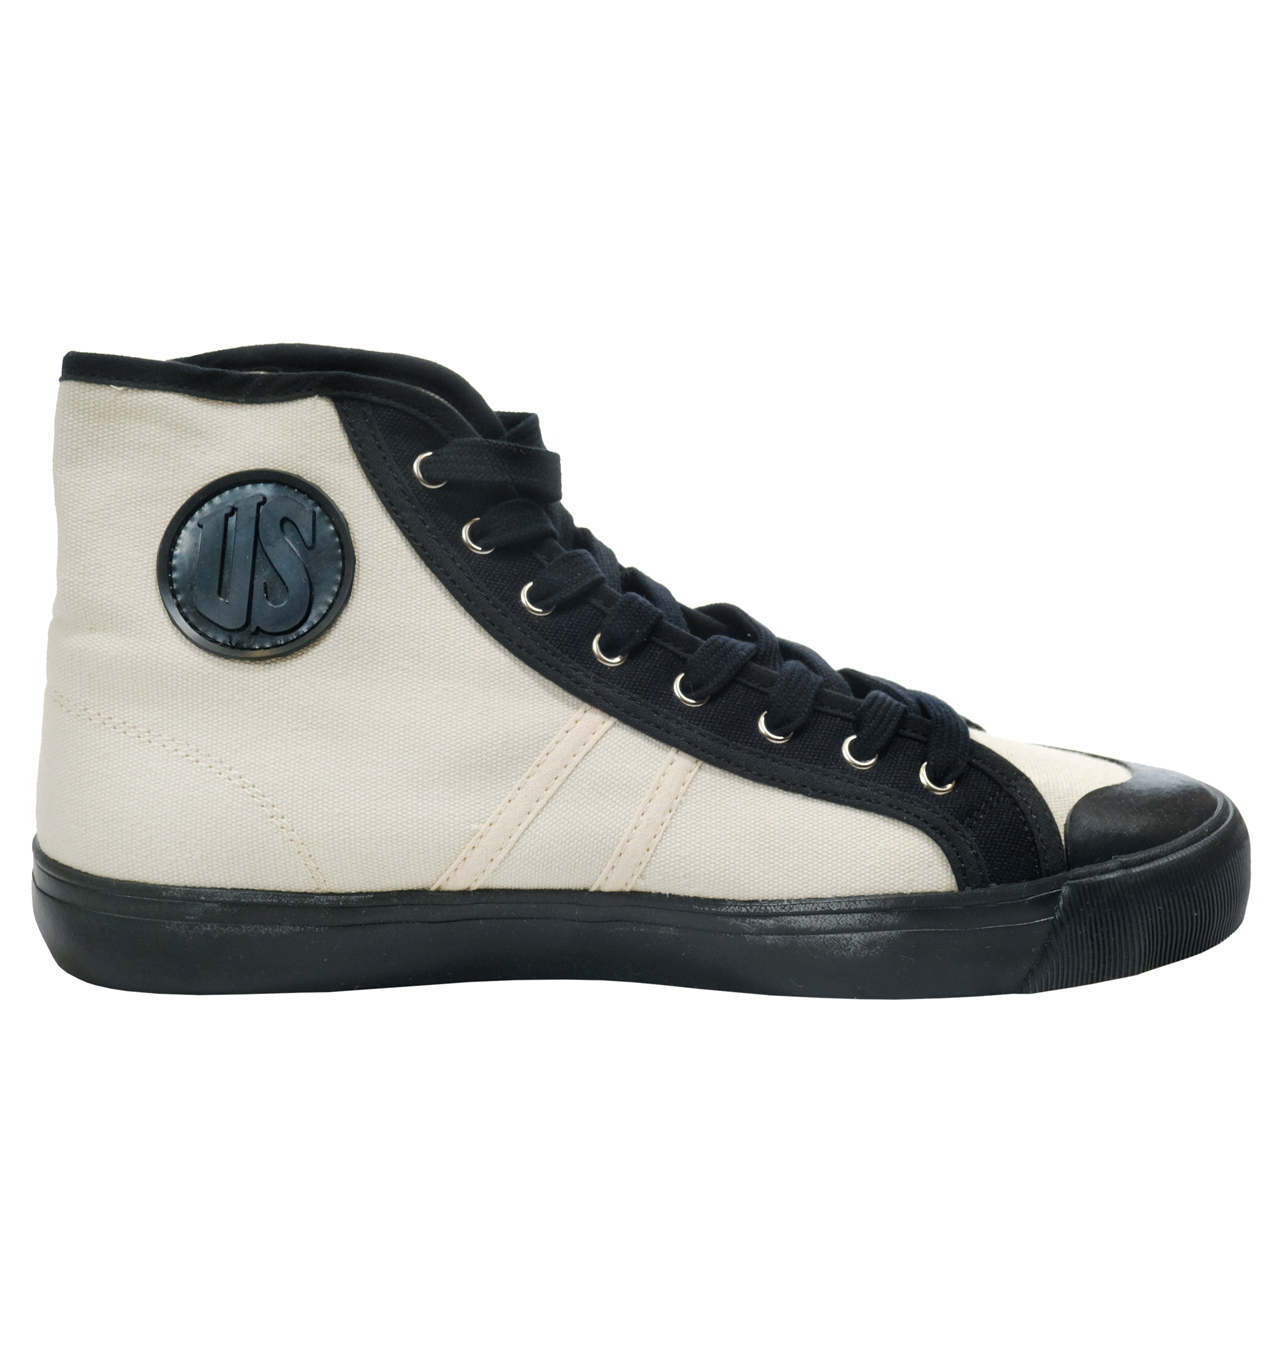 Colchester-By-US-Rubber-Co---High-Top-Contrast-Canvas-Sneaker---Black-Ecru-1